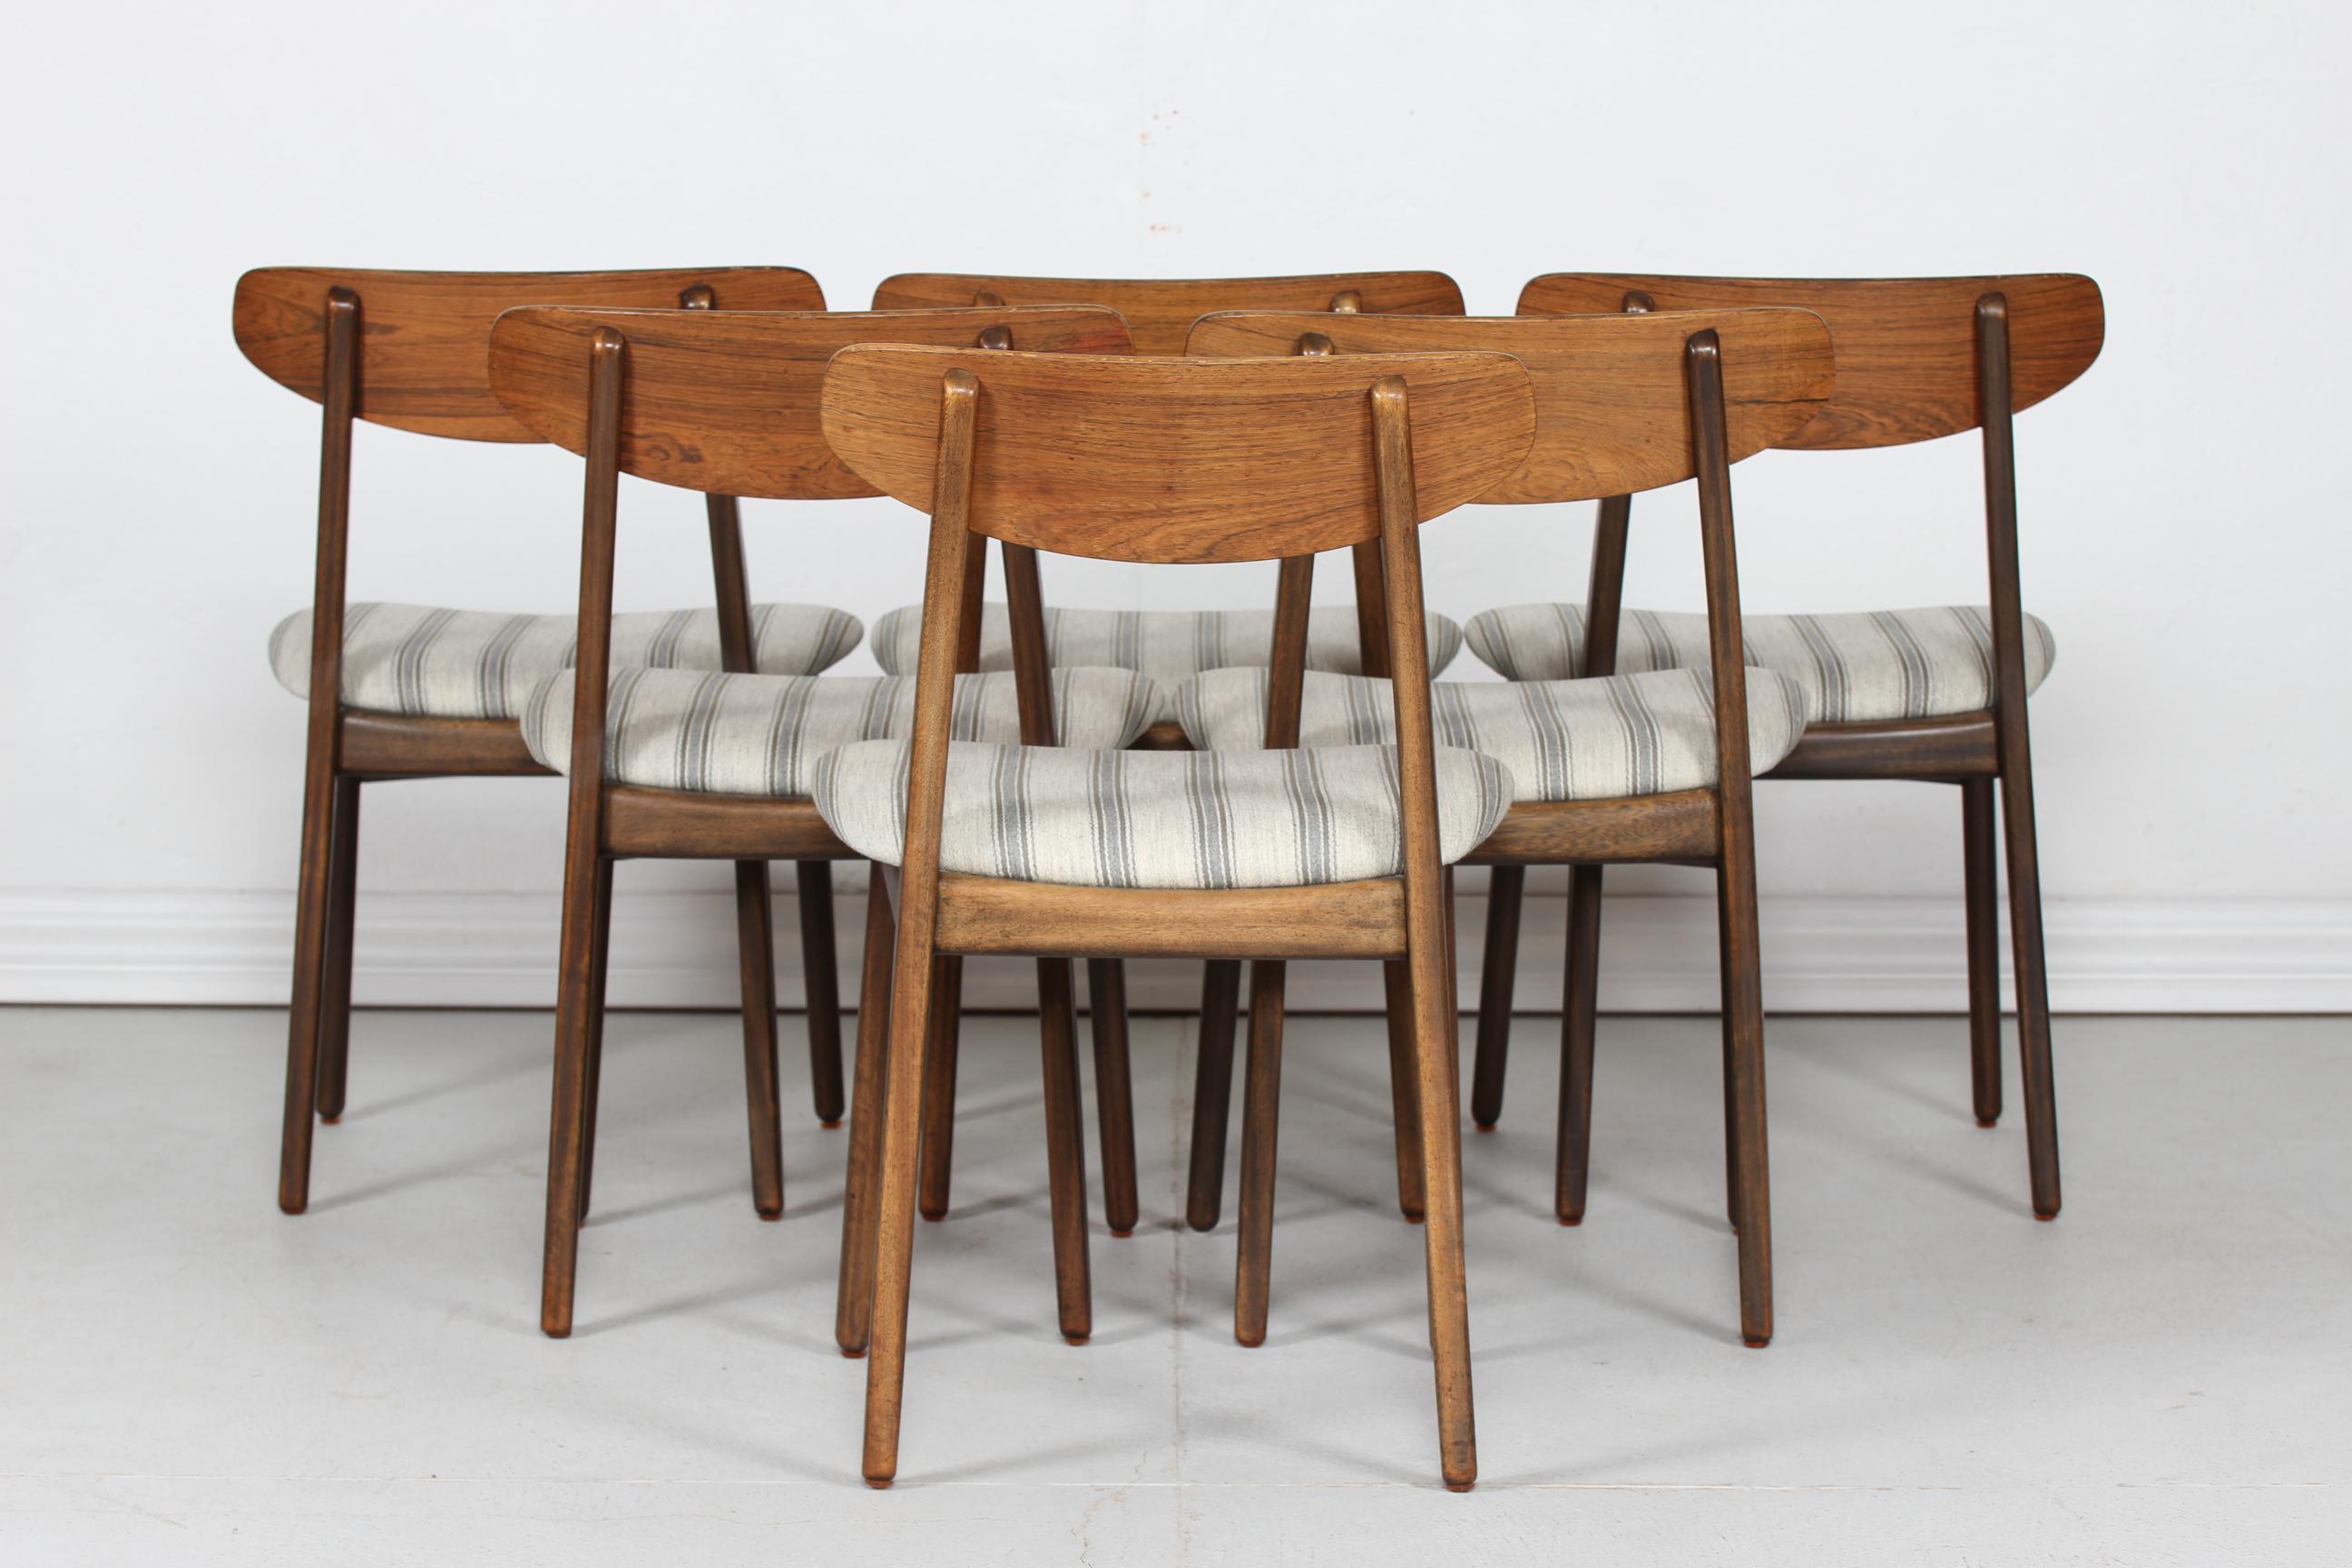 20th Century Danish Modern Set of Six Curved Back Dining Room Chairs with Striped Upholstery